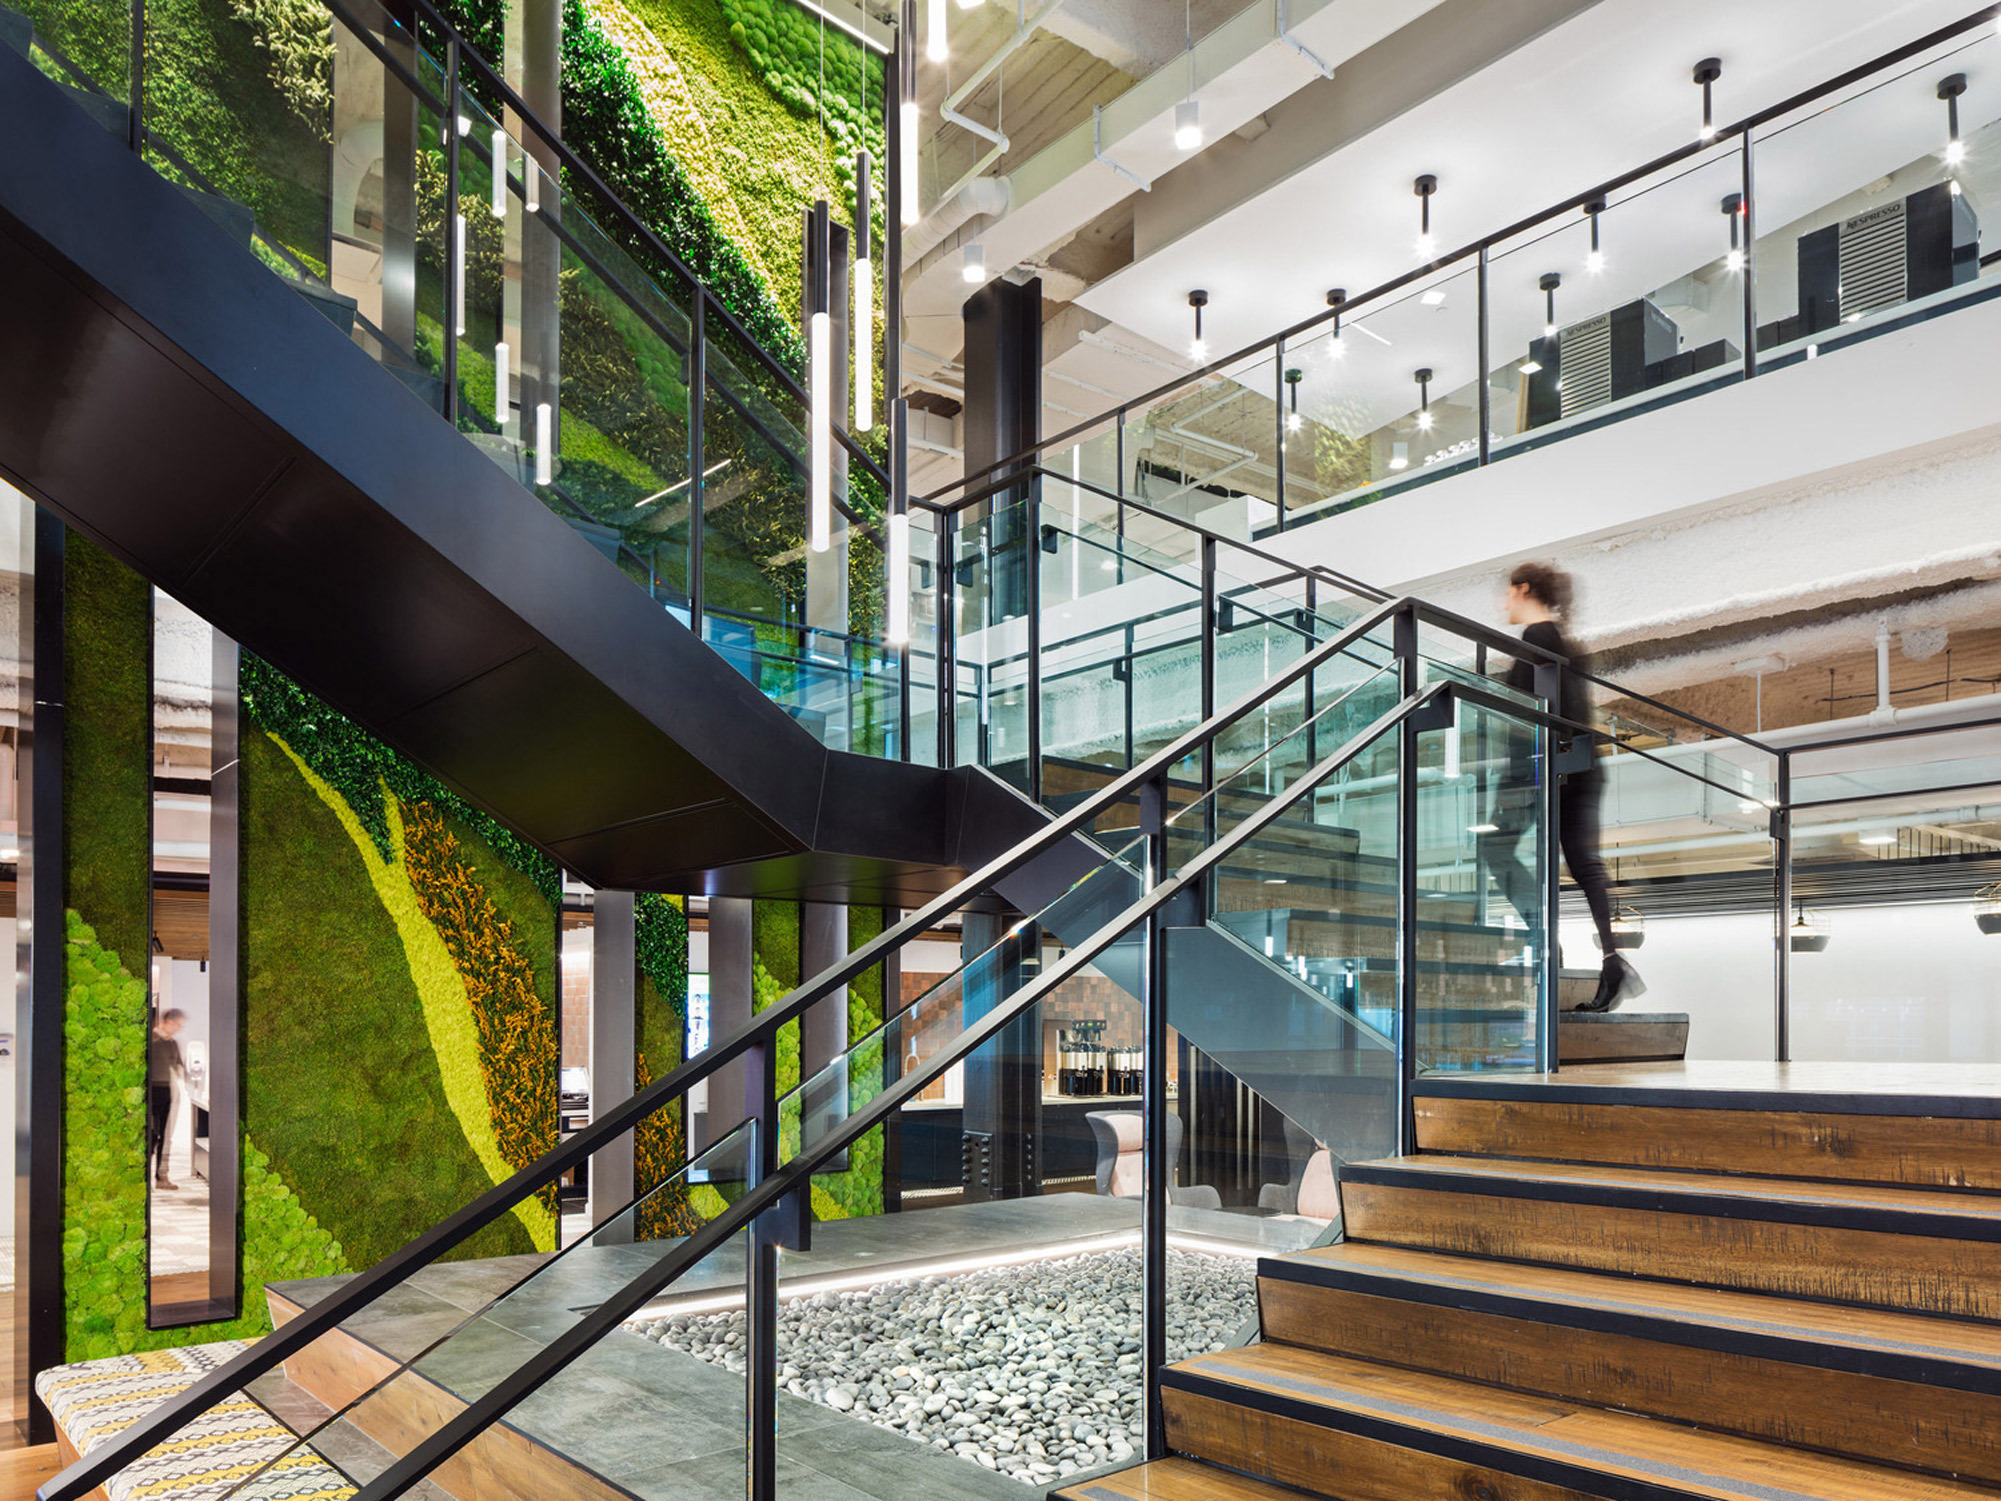 Modern interior with a biophilic design, featuring a spiral staircase with wooden steps, glass balustrades, and living green walls. The space includes concrete ceilings with exposed ductwork, black pendant lighting, and a pebble-filled atrium, emphasizing sustainability and connection to nature.